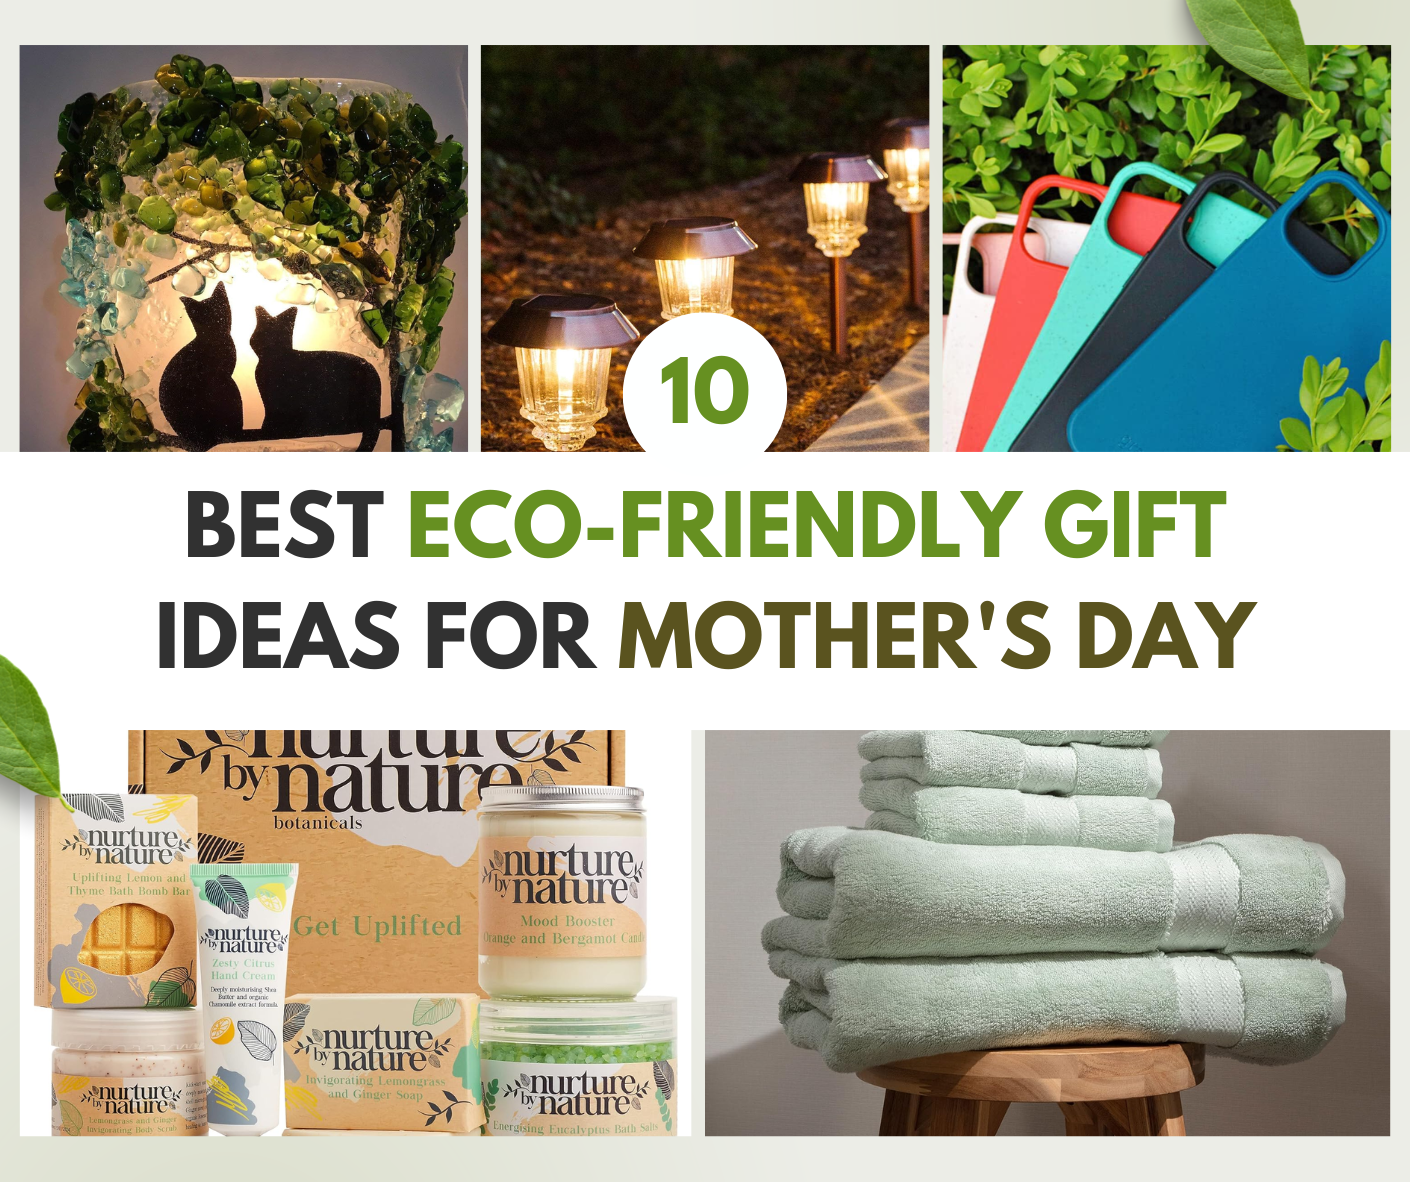 5 Best Hoka Gifts for Mother's Day: Comfort and Care for Every Mom